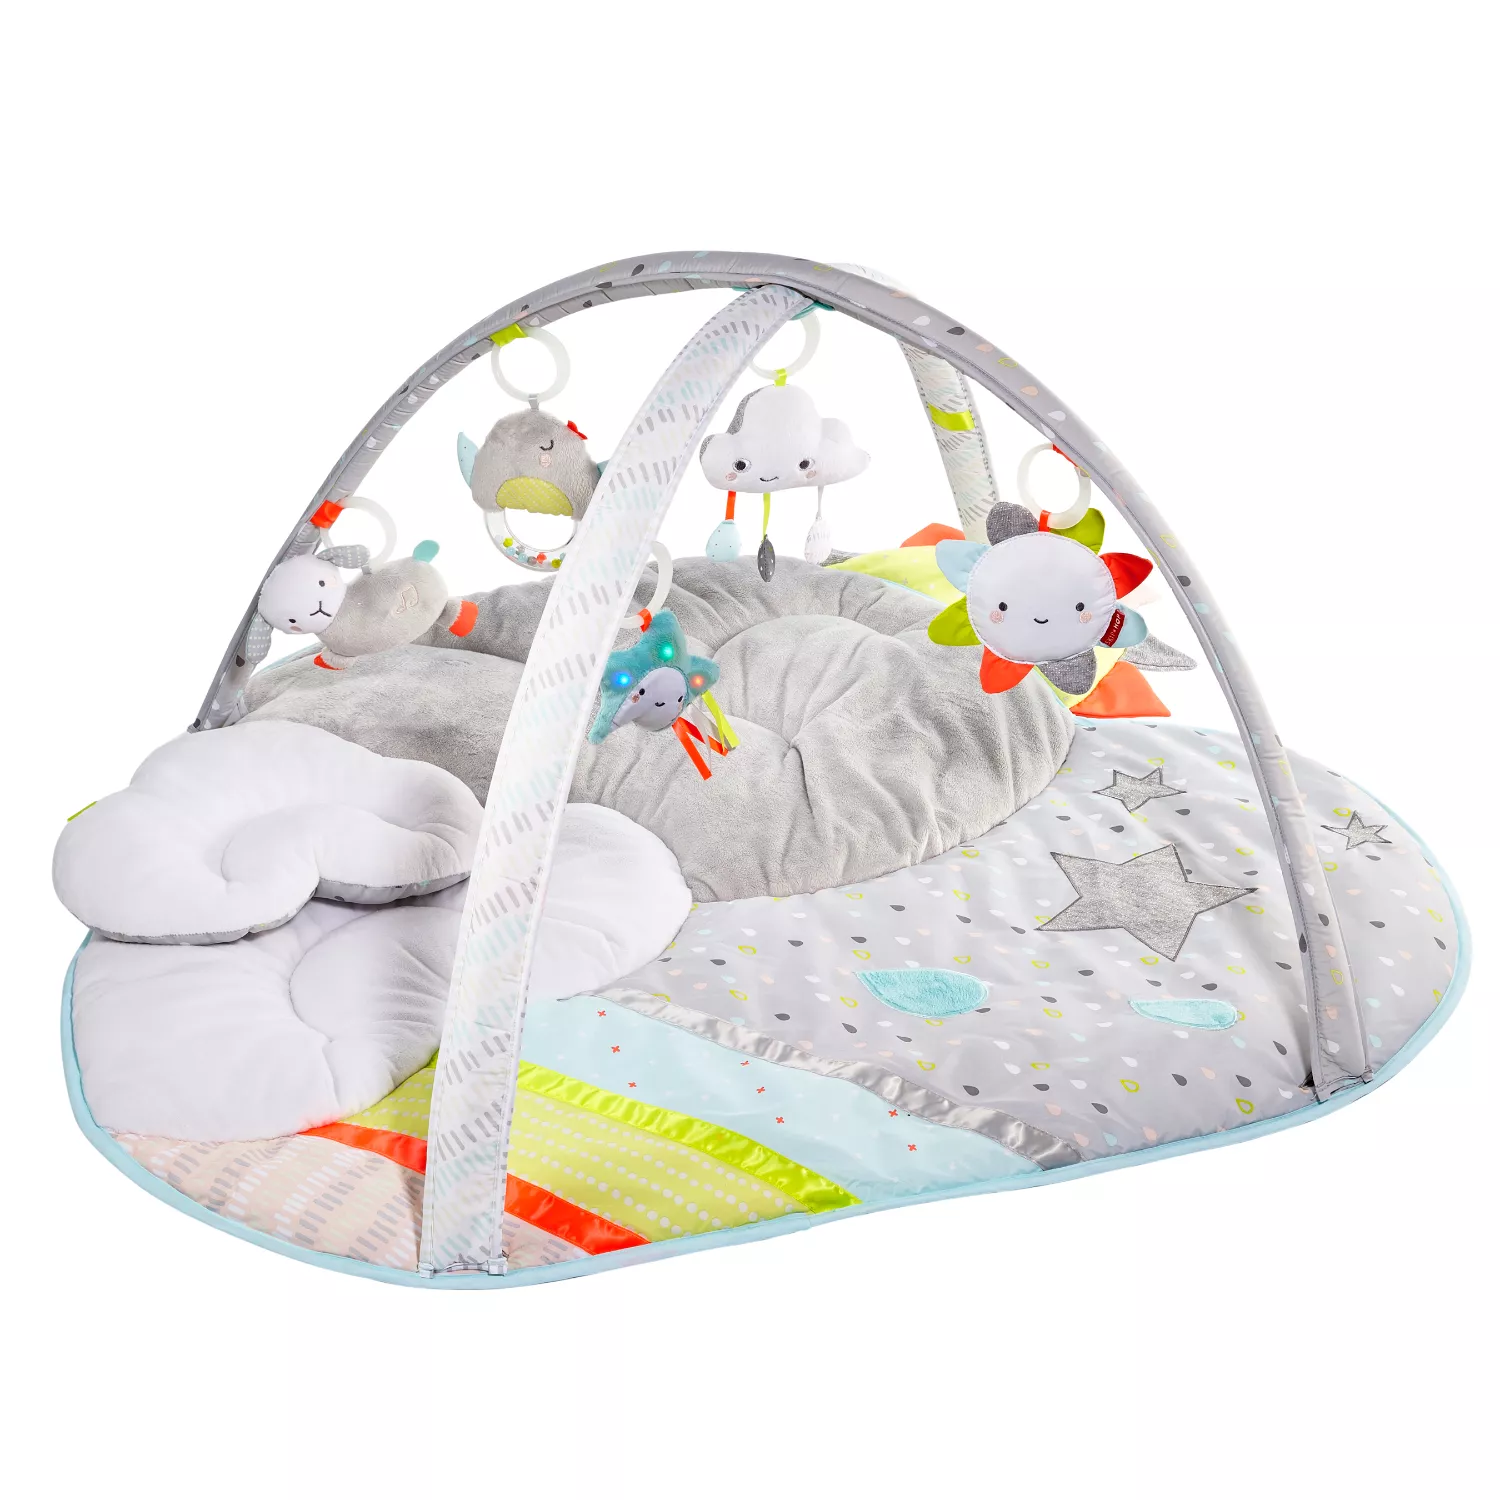 SkipHop Silver Lining Cloud Activity Gym